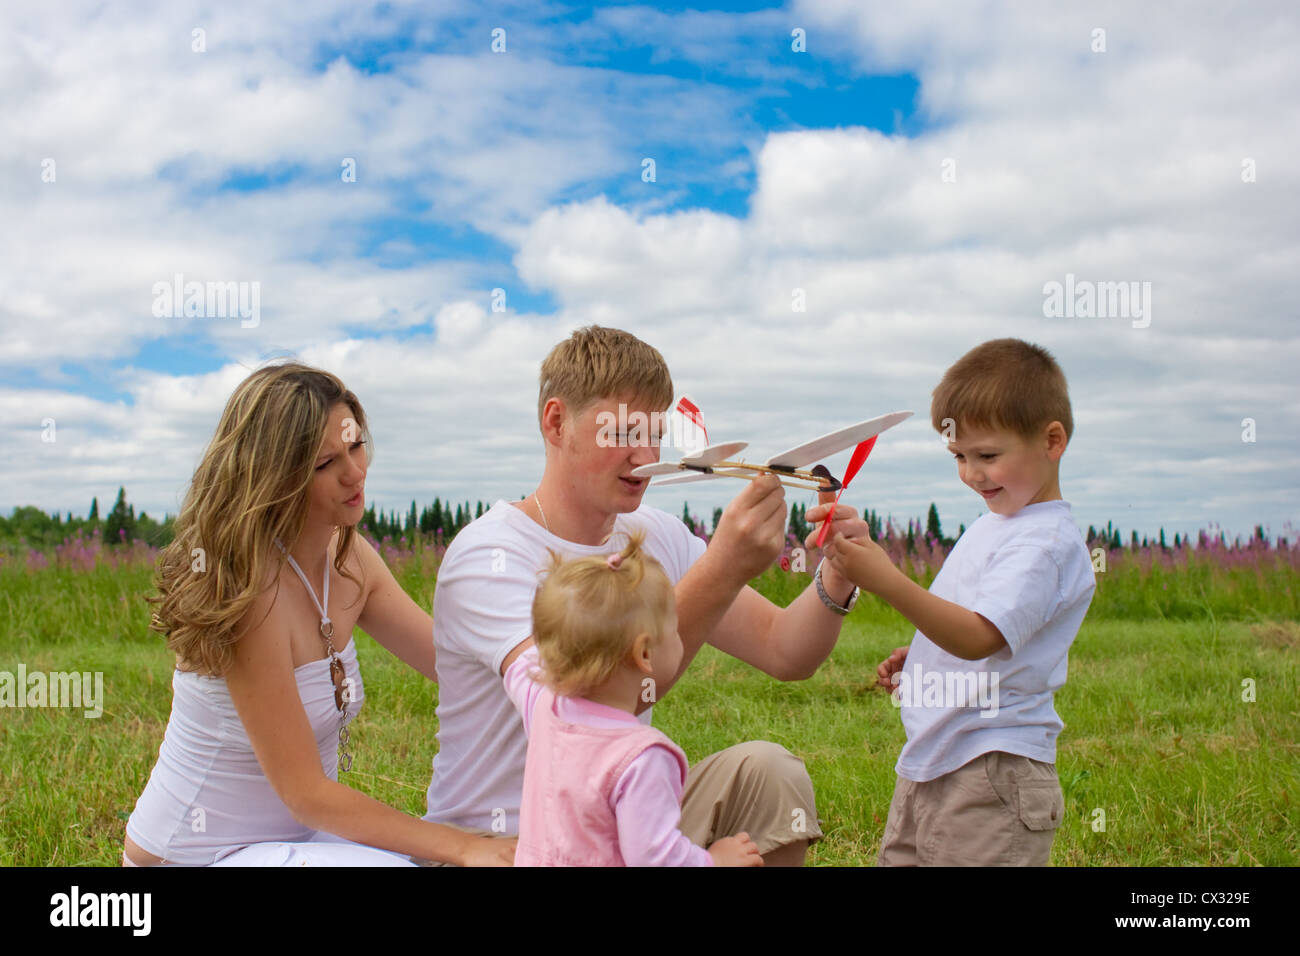 Happy family launching toy aircraft model together Stock Photo